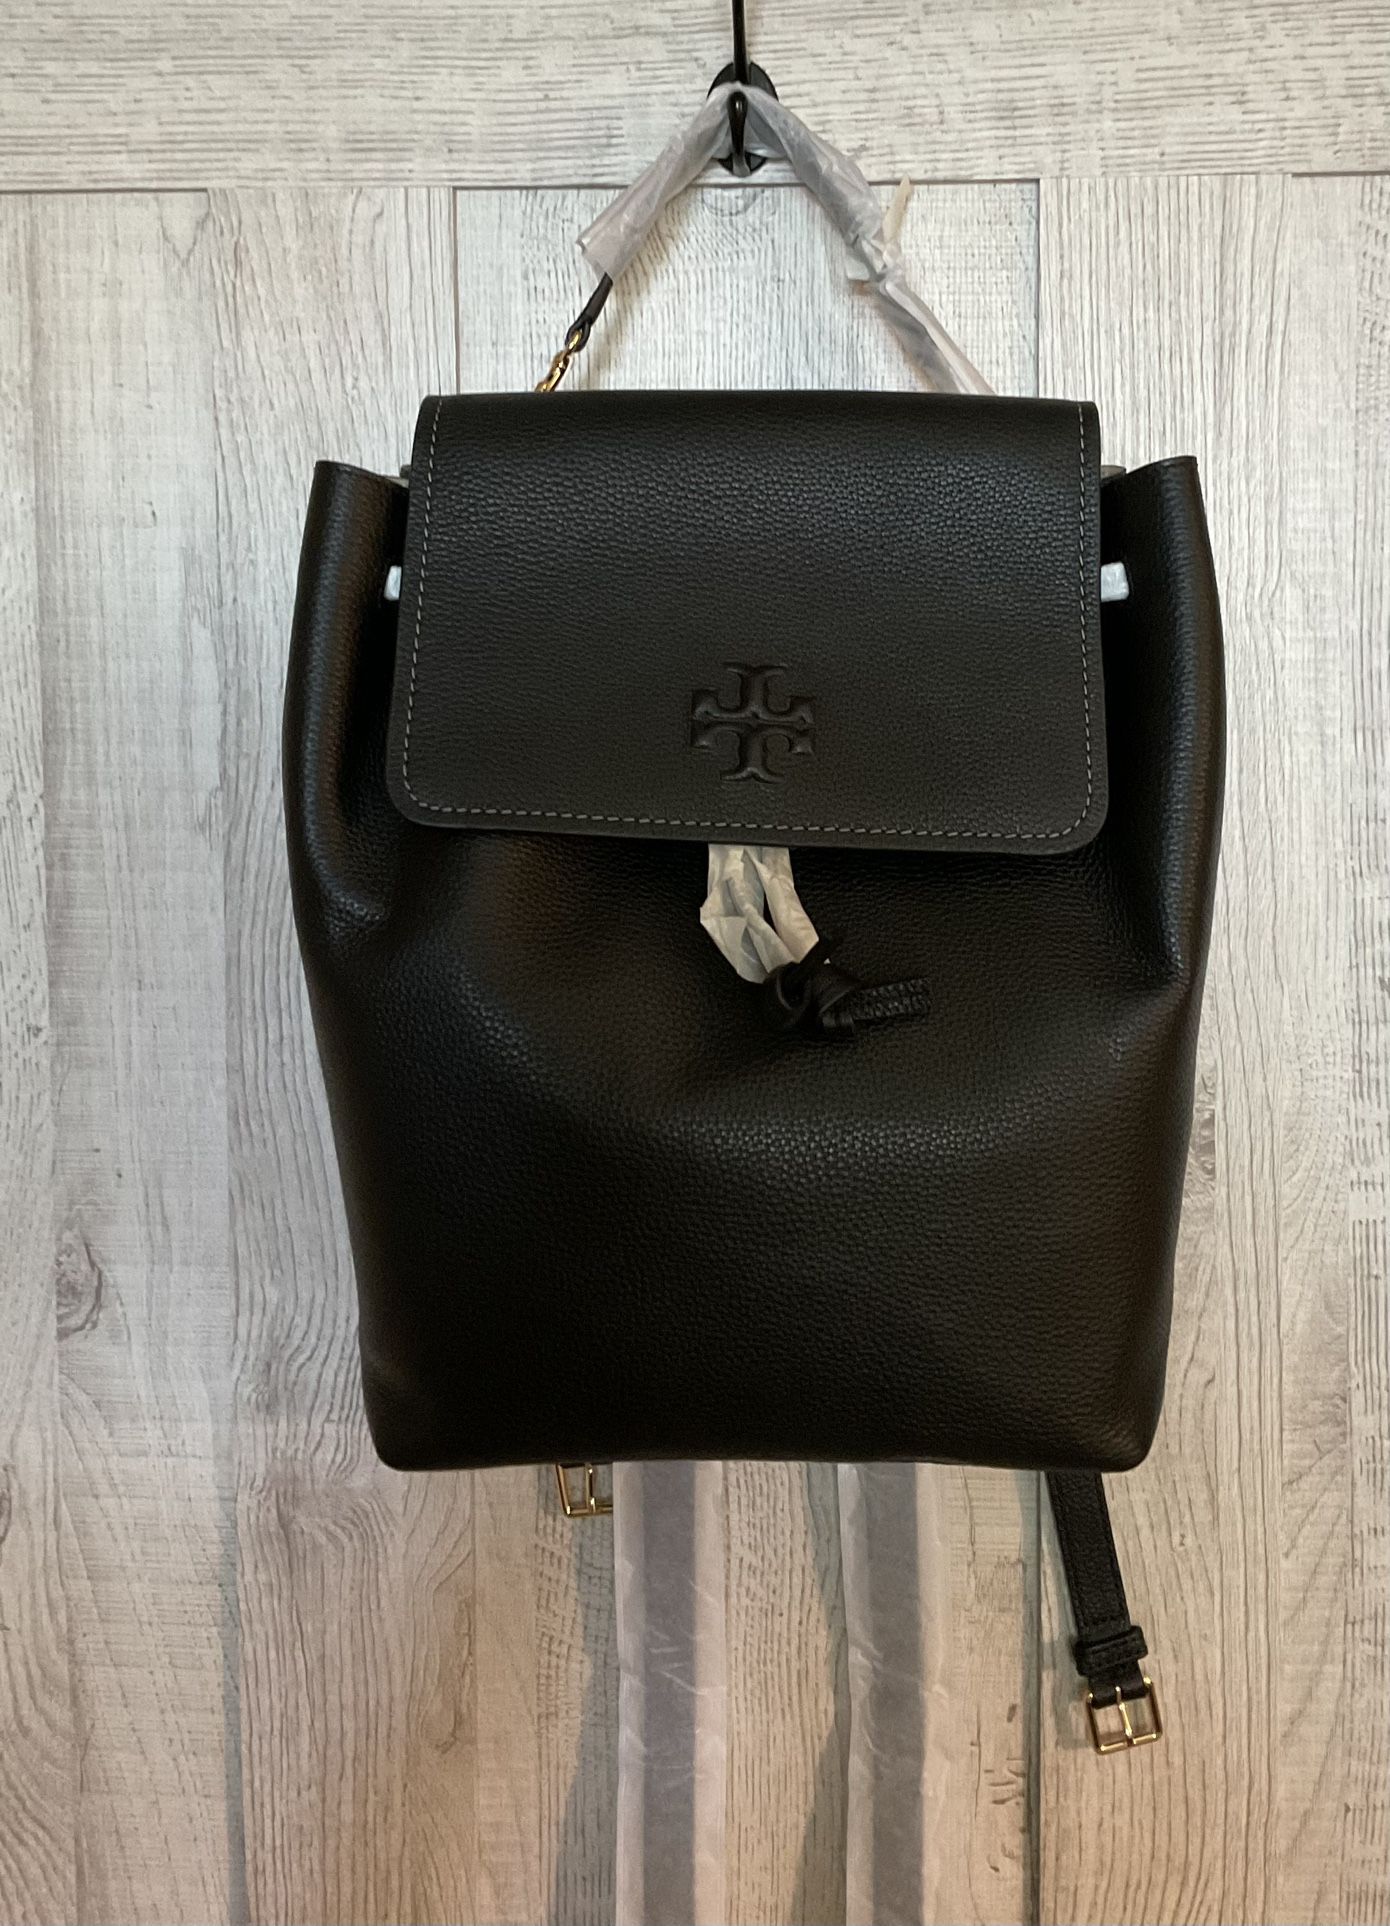 NWT Authentic Tory Burch Leather Black Backpack